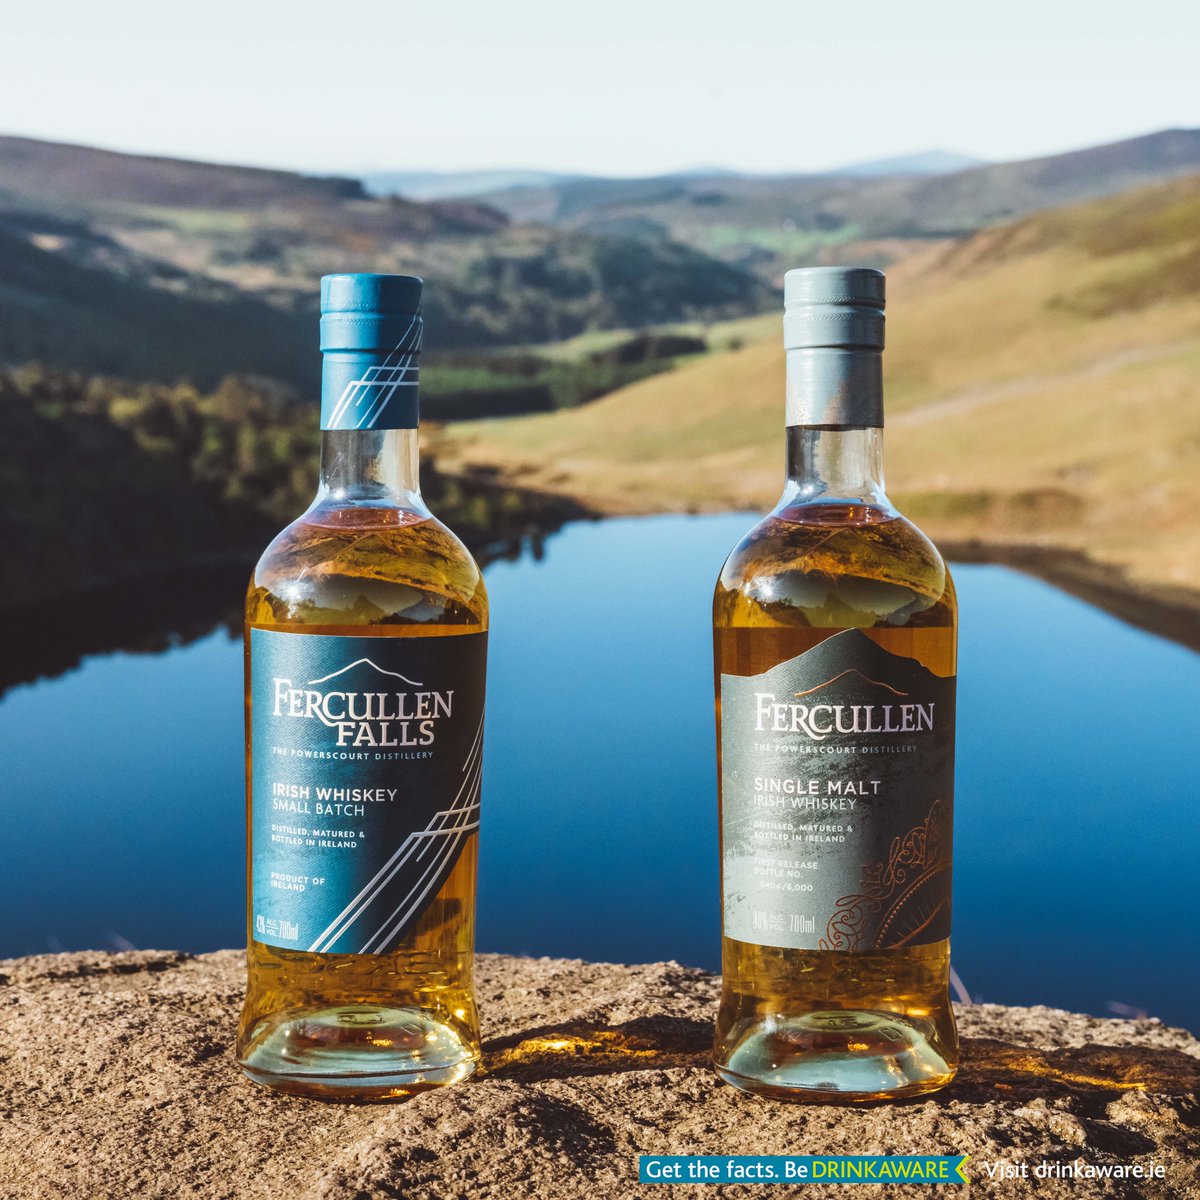 At Fercullen Irish Whiskey, we take immense pride in crafting exceptional liquid perfection on the historic Powerscourt Estate in Co. Wicklow. 🥃✨ Elevate your whiskey experience with the essence of our rich heritage and unparalleled craftsmanship.

#FercullenIrishWhiskey